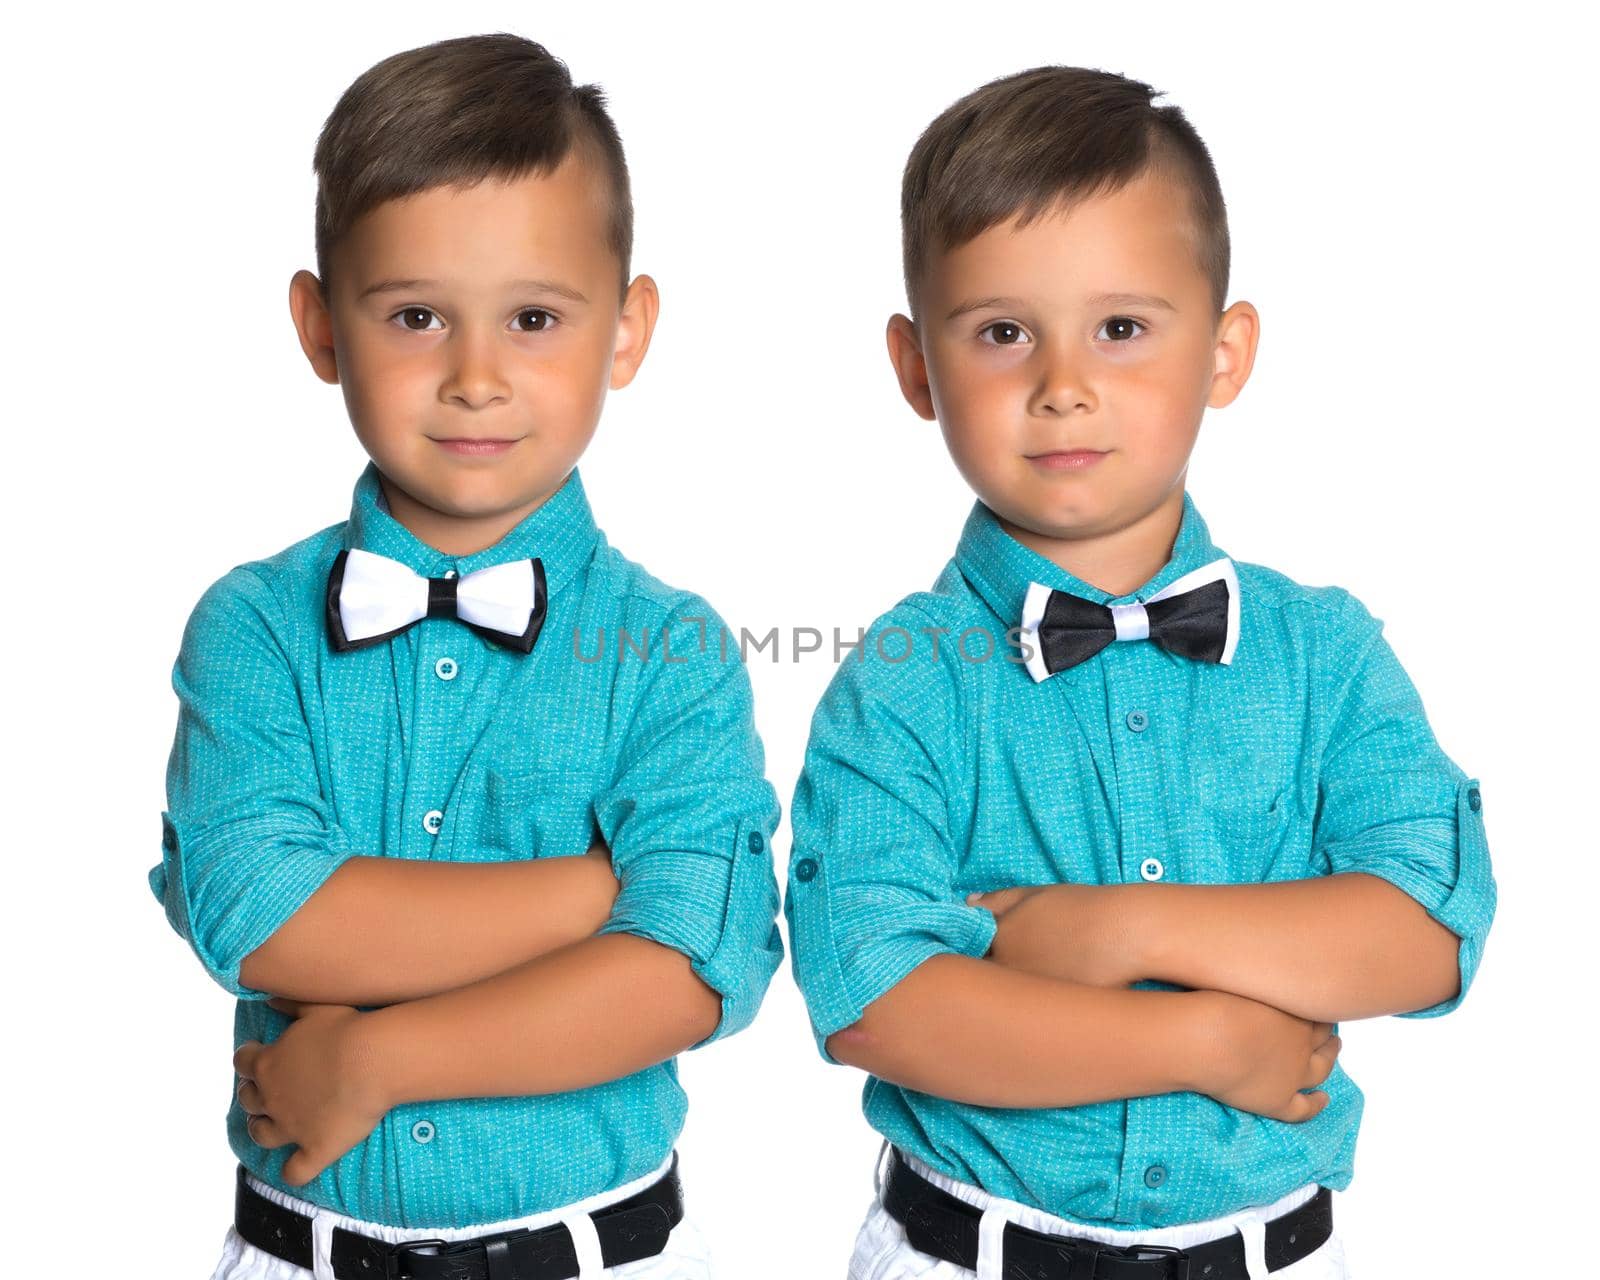 Two cute little boys, brothers close-up. The concept of a happy childhood, the development of a child in the family. Isolated on white background.